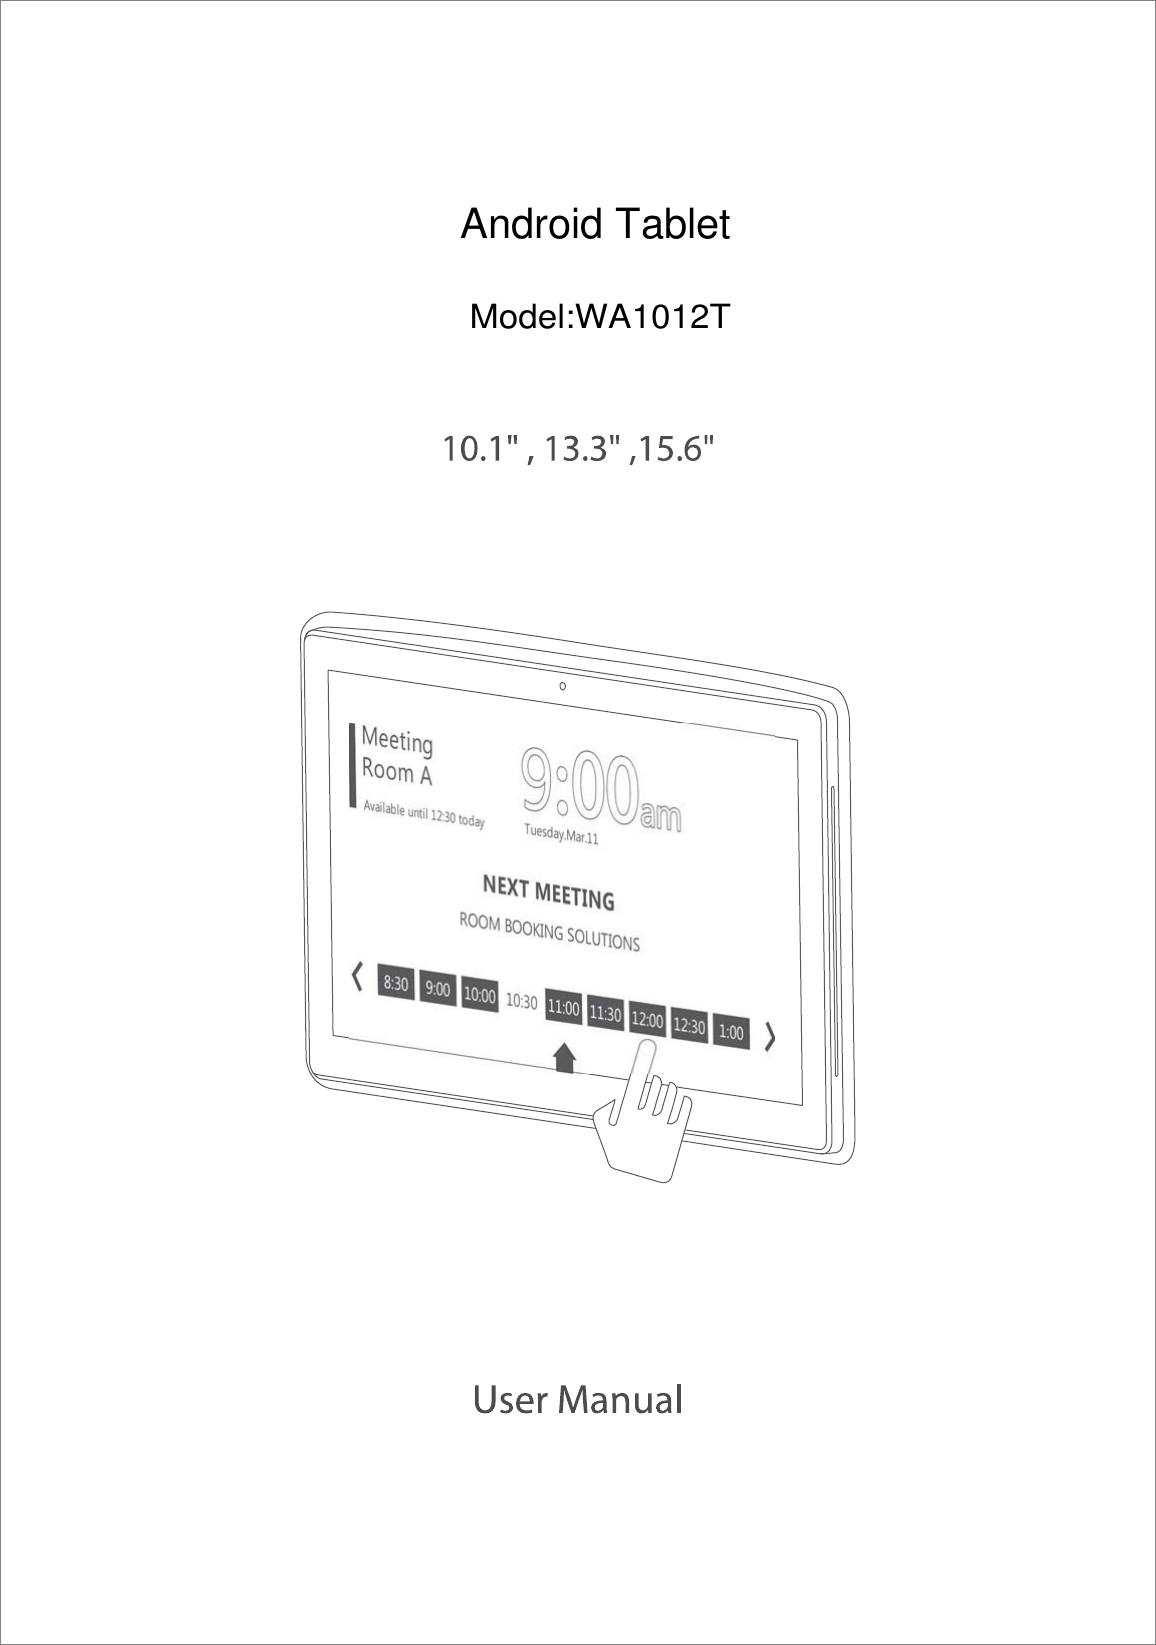 Android TabletModel:WA1012T